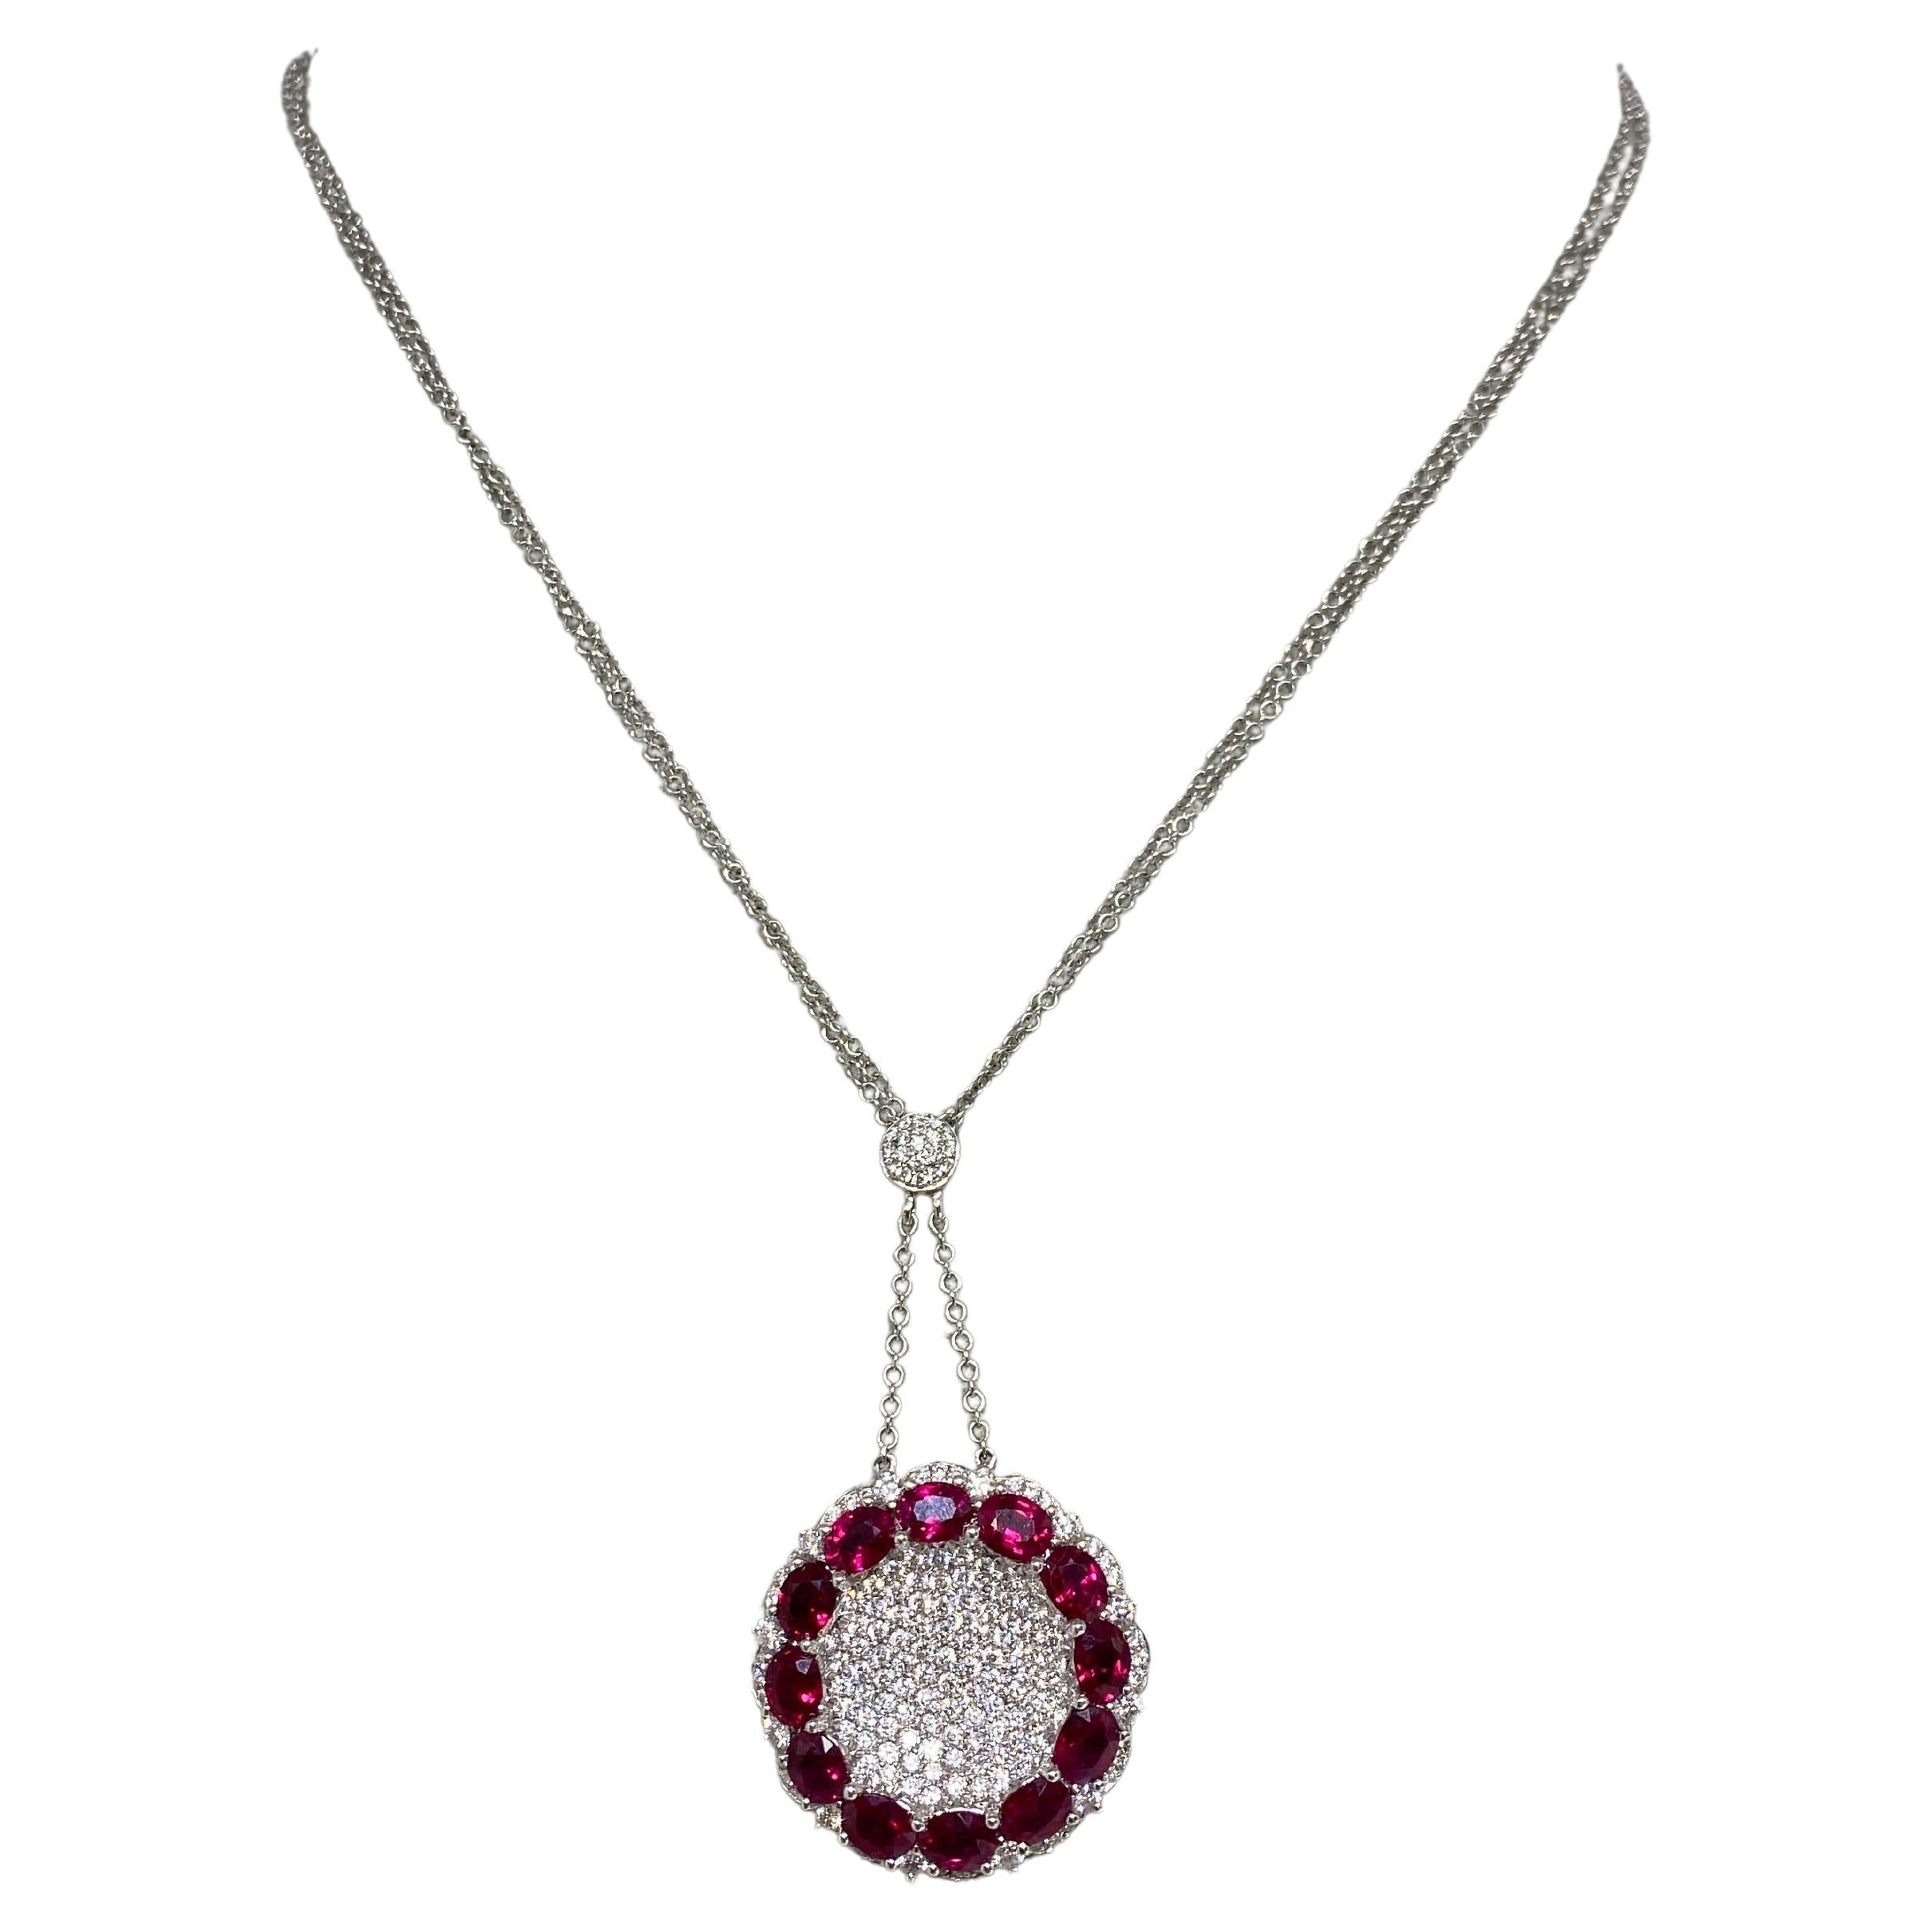 14k White Gold 5.04cttw Natural Ruby & Diamond Round Pendant Necklace  For Sale